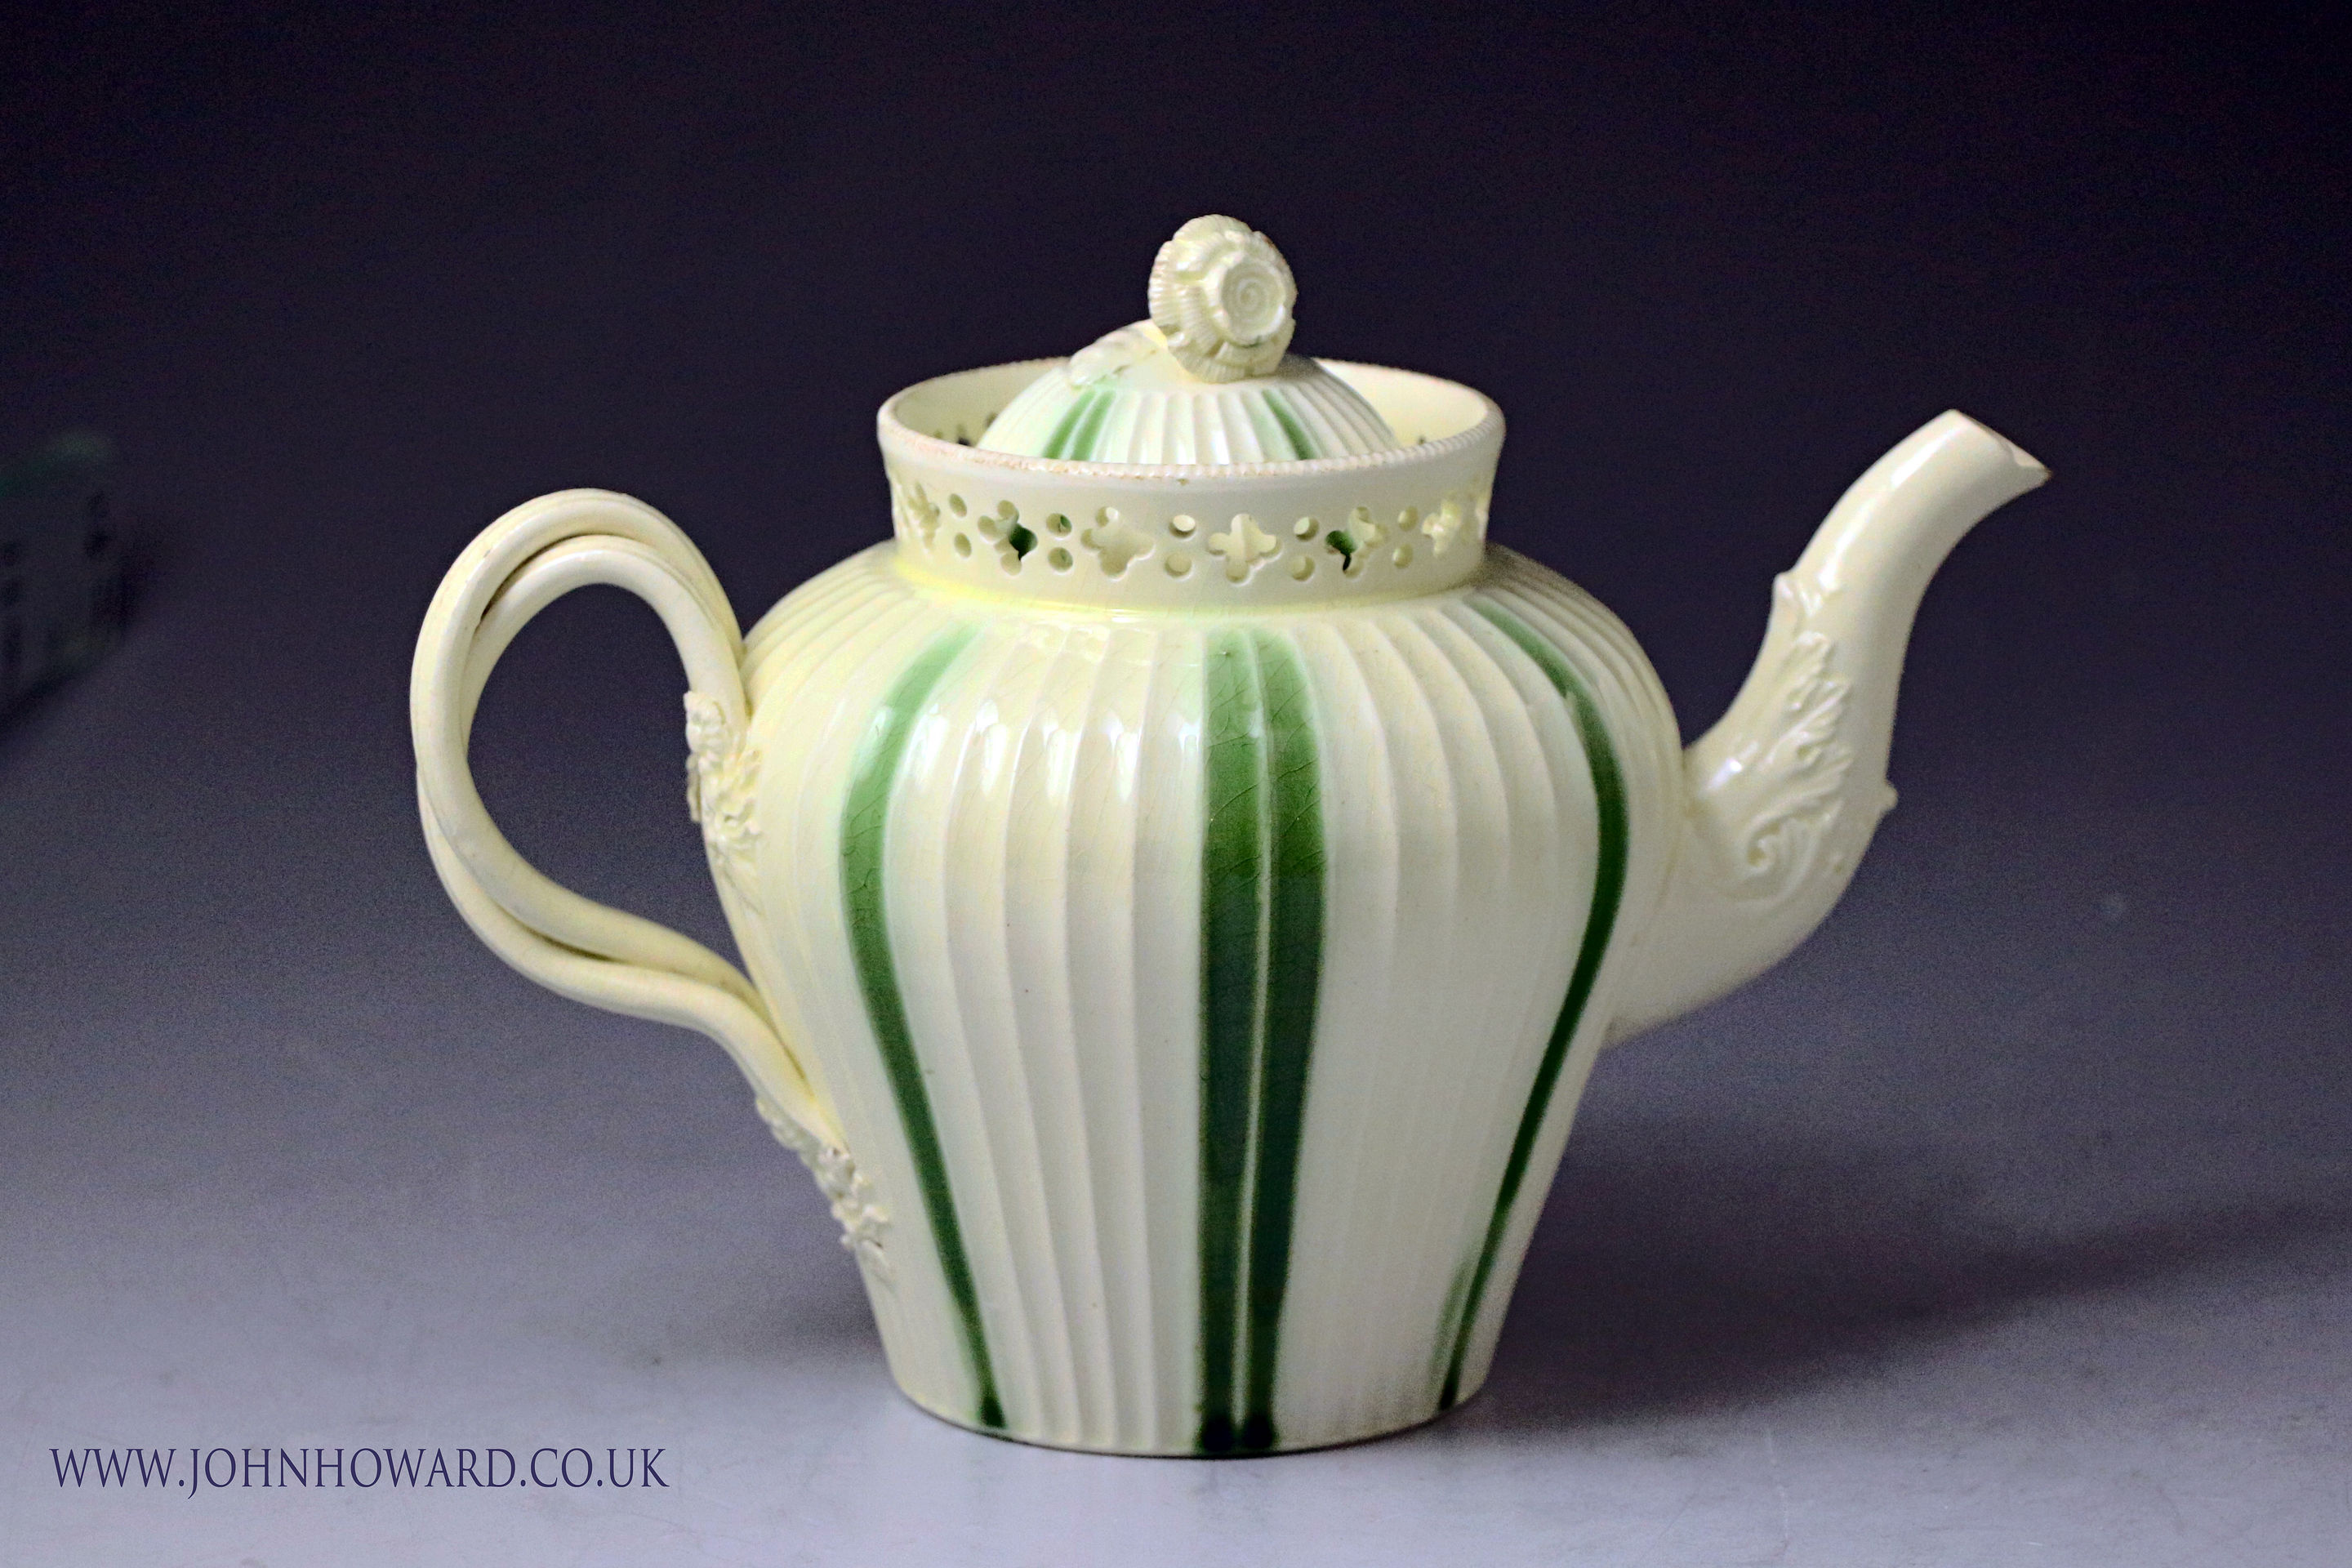 18th century English creamware pottery green striped teapot with reticlated ornamentation .Probably Yorkshire Pottery